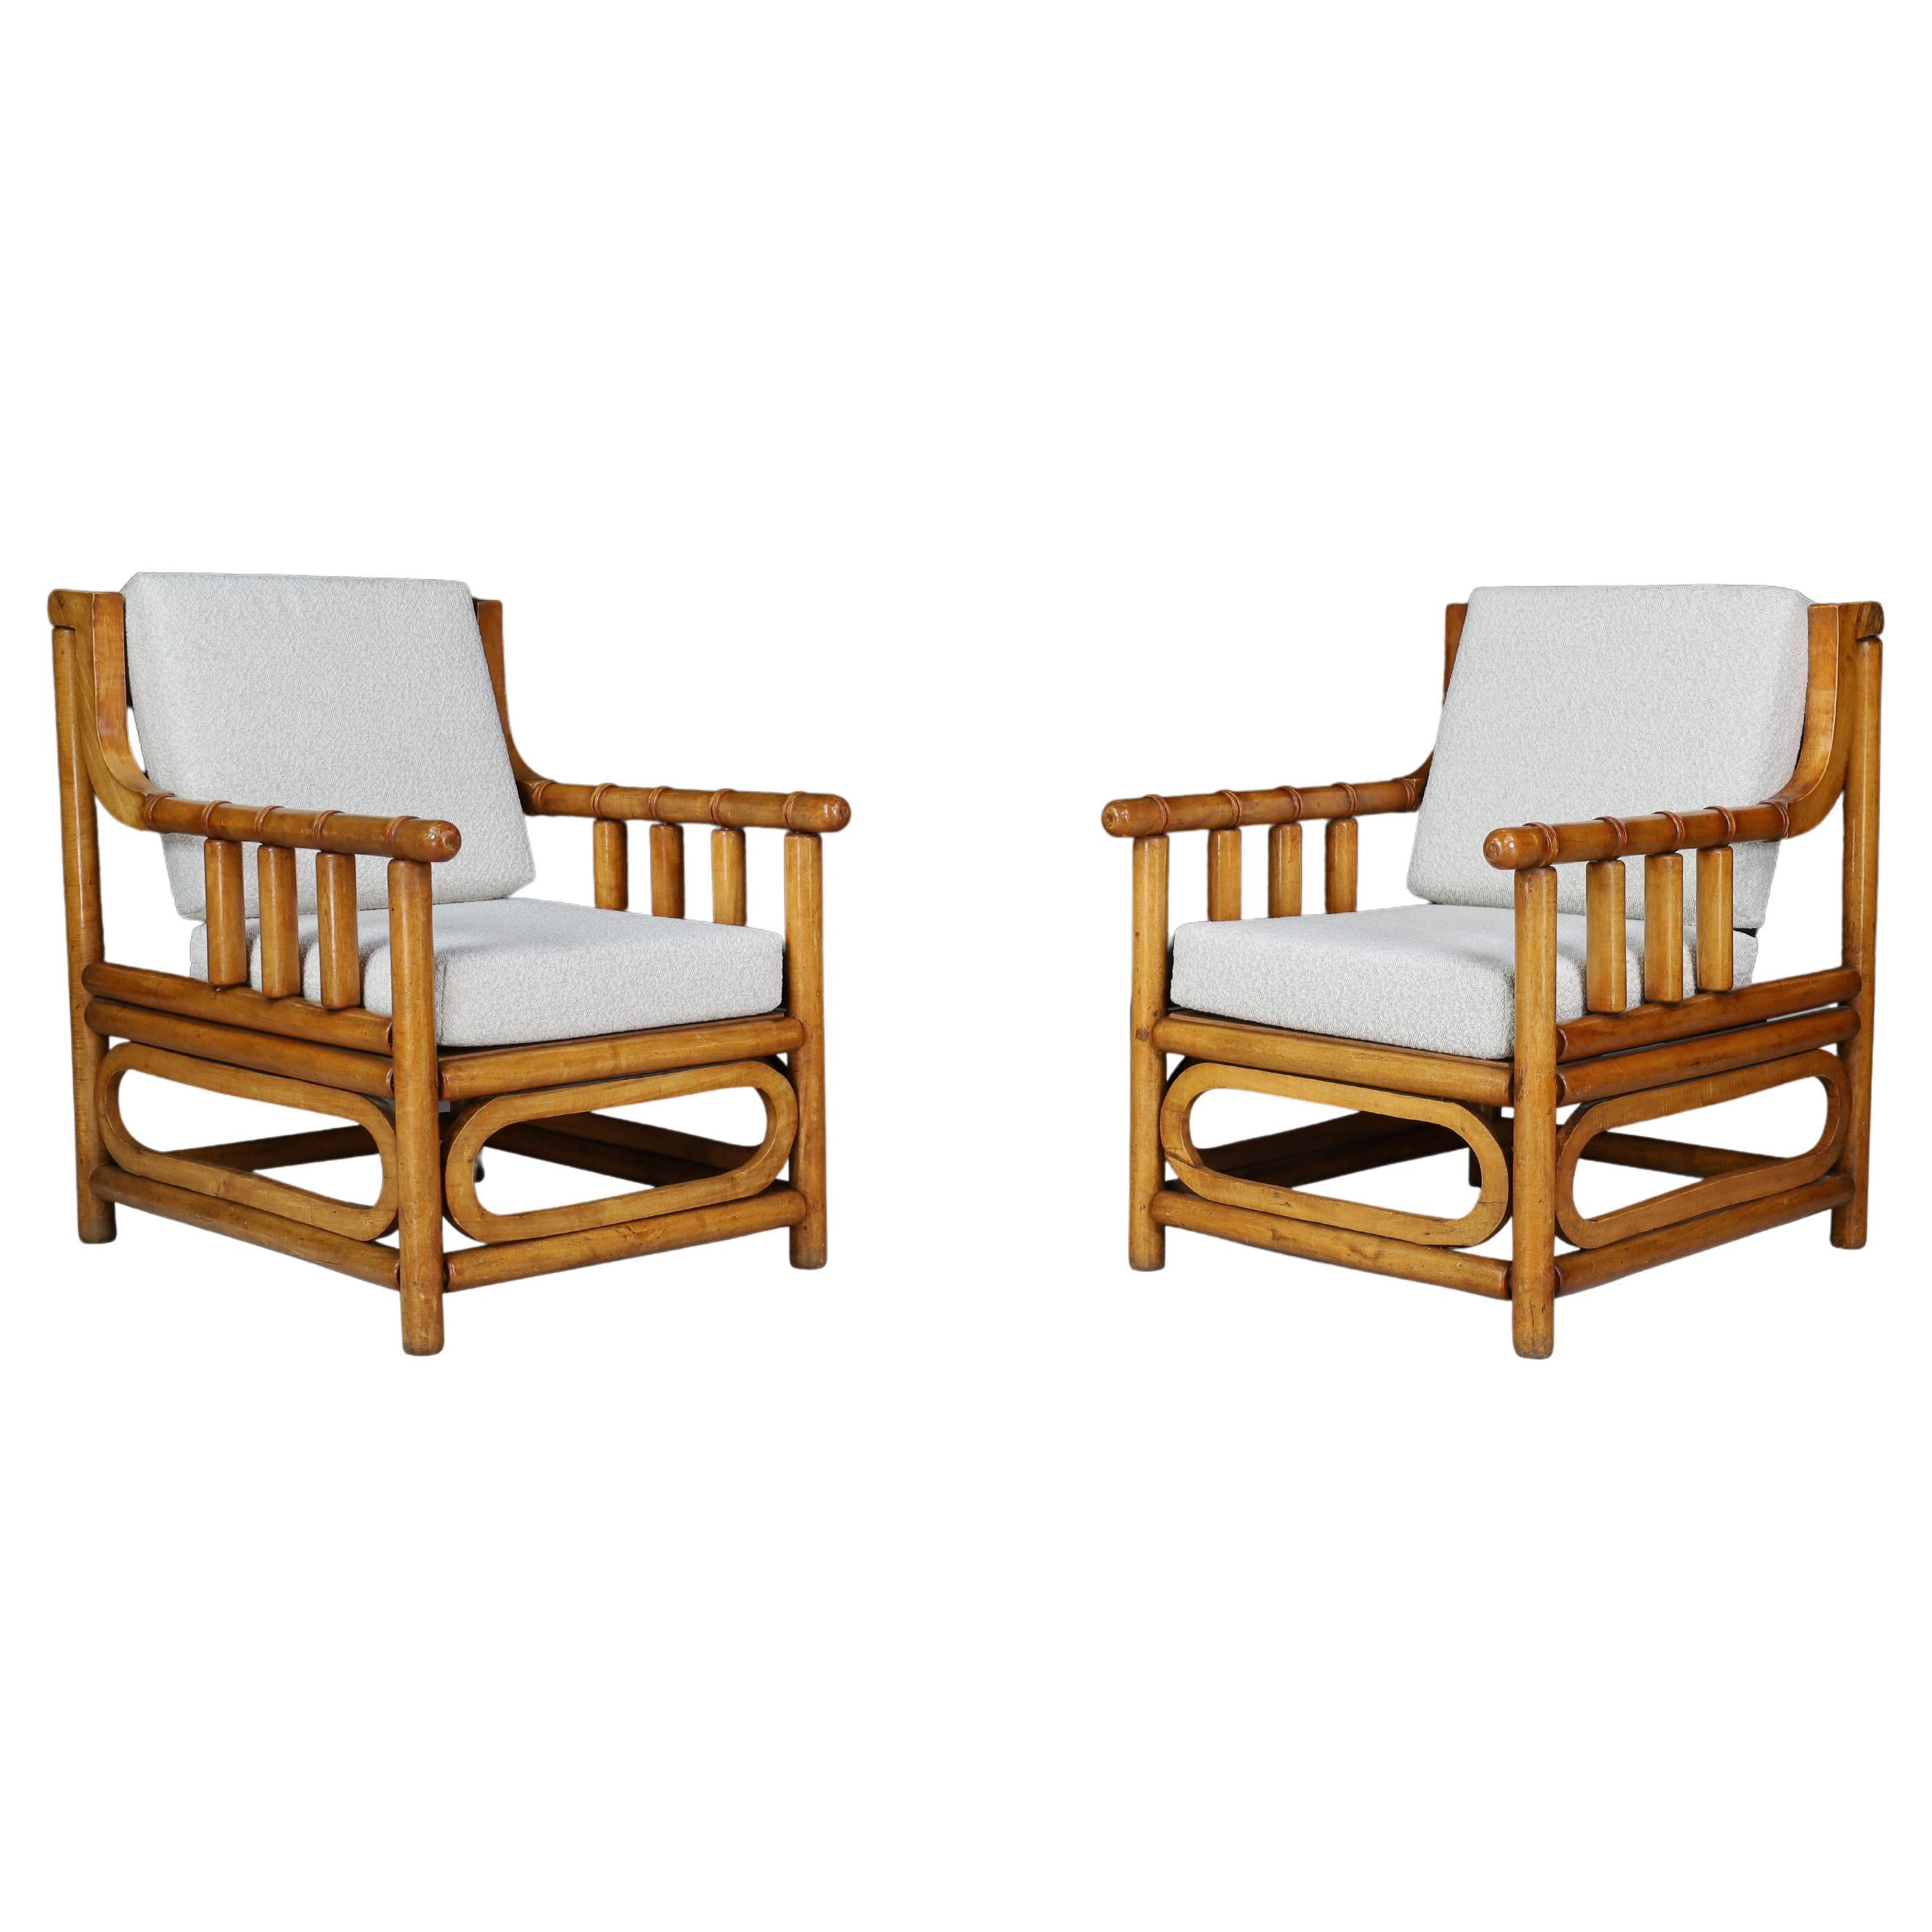 Mid-Century Modern Bamboo Wood Bouclé upholstery Armchairs  France 1950 set of 2